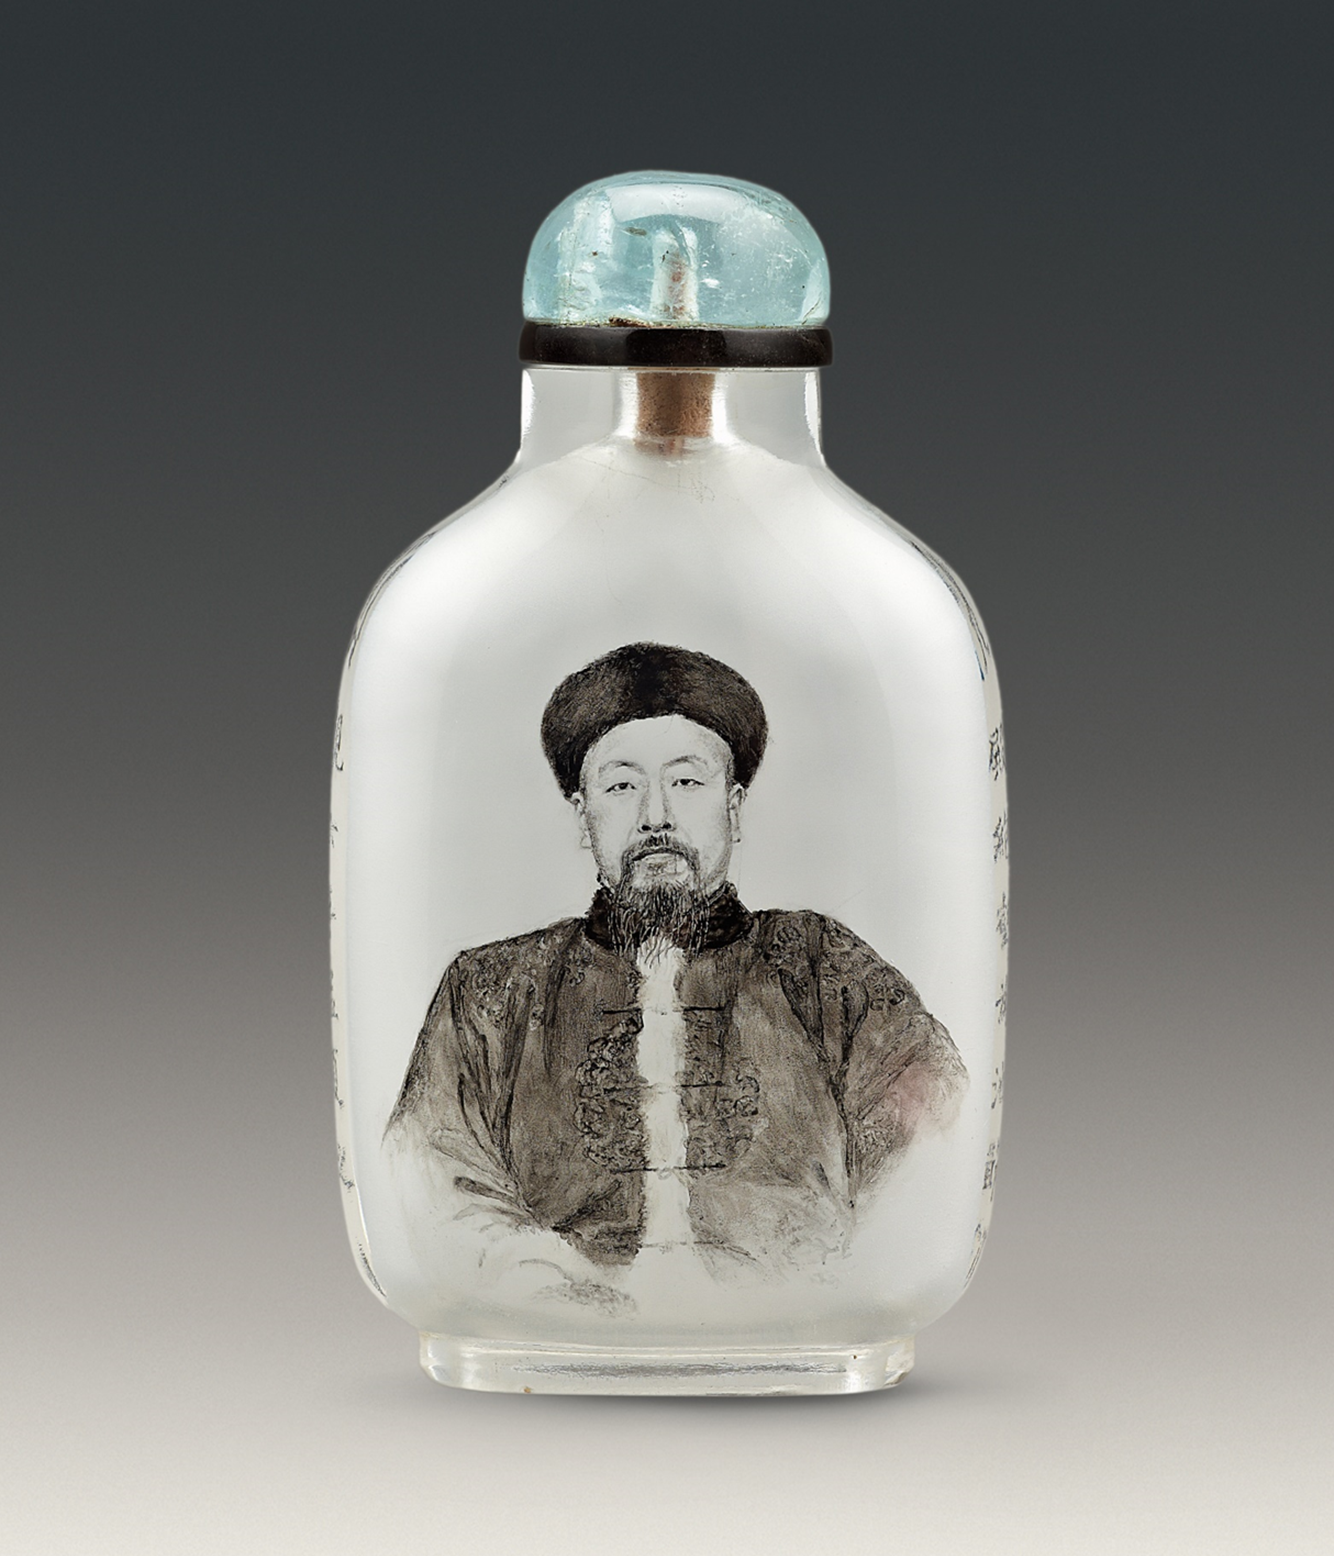 The Hong Kong Museum of Art today (September 28) announced that Christopher and Josephine Sin generously donated nearly 500 pieces of Chinese snuff bottles from the Fuyun Xuan Collection of Chinese Snuff Bottles for the museum's permanent collection. Picture shows the newly donated rock crystal snuff bottle, inside-painted with a portrait of Duan Fang. The portrait, created by Ma Shaoxuan, a master of inner painting, vividly captures the likeness of this prominent statesman from the late Qing dynasty.